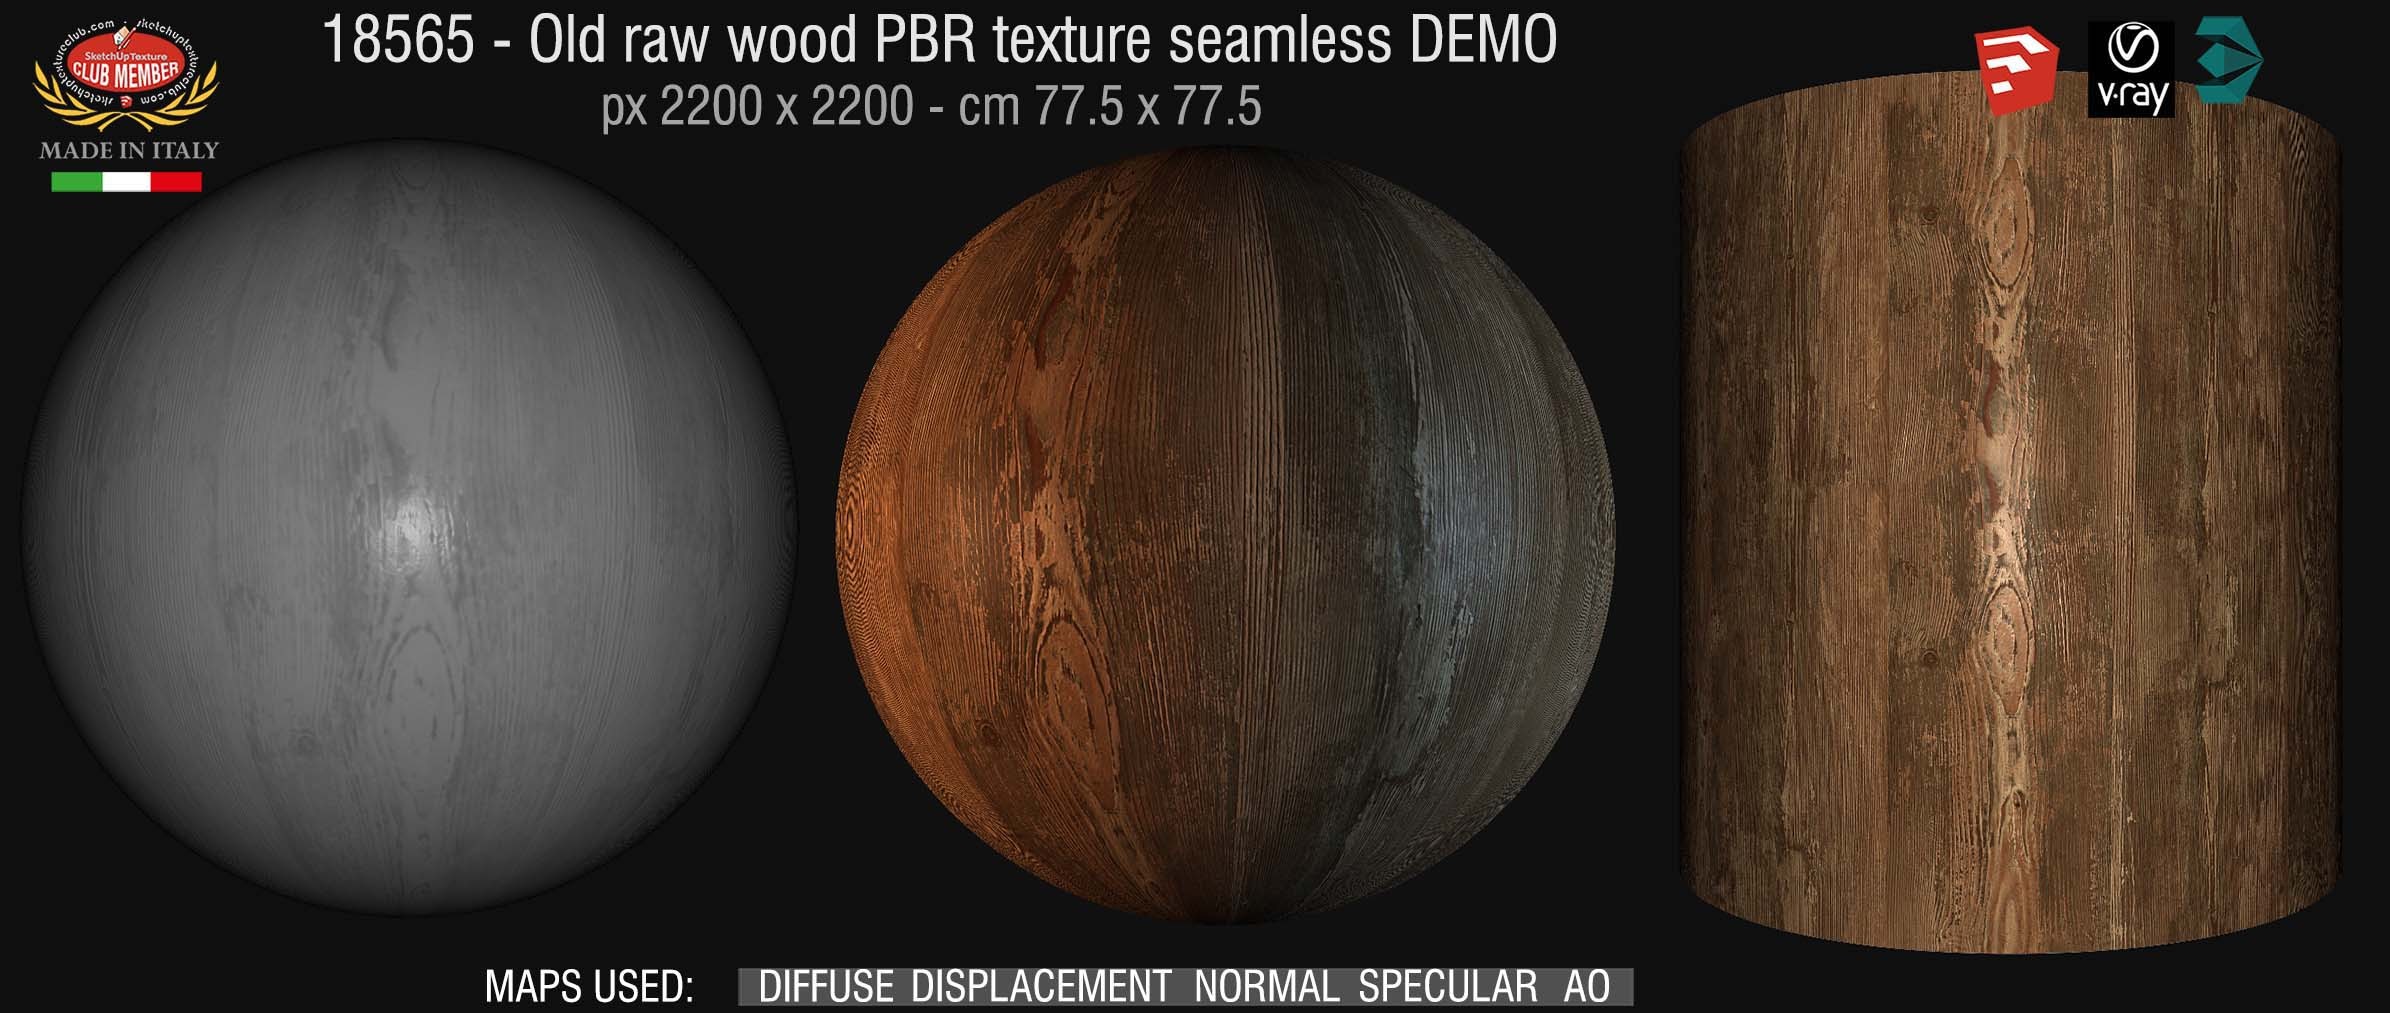 18565 old raw wood PBR texture seamless DEMO